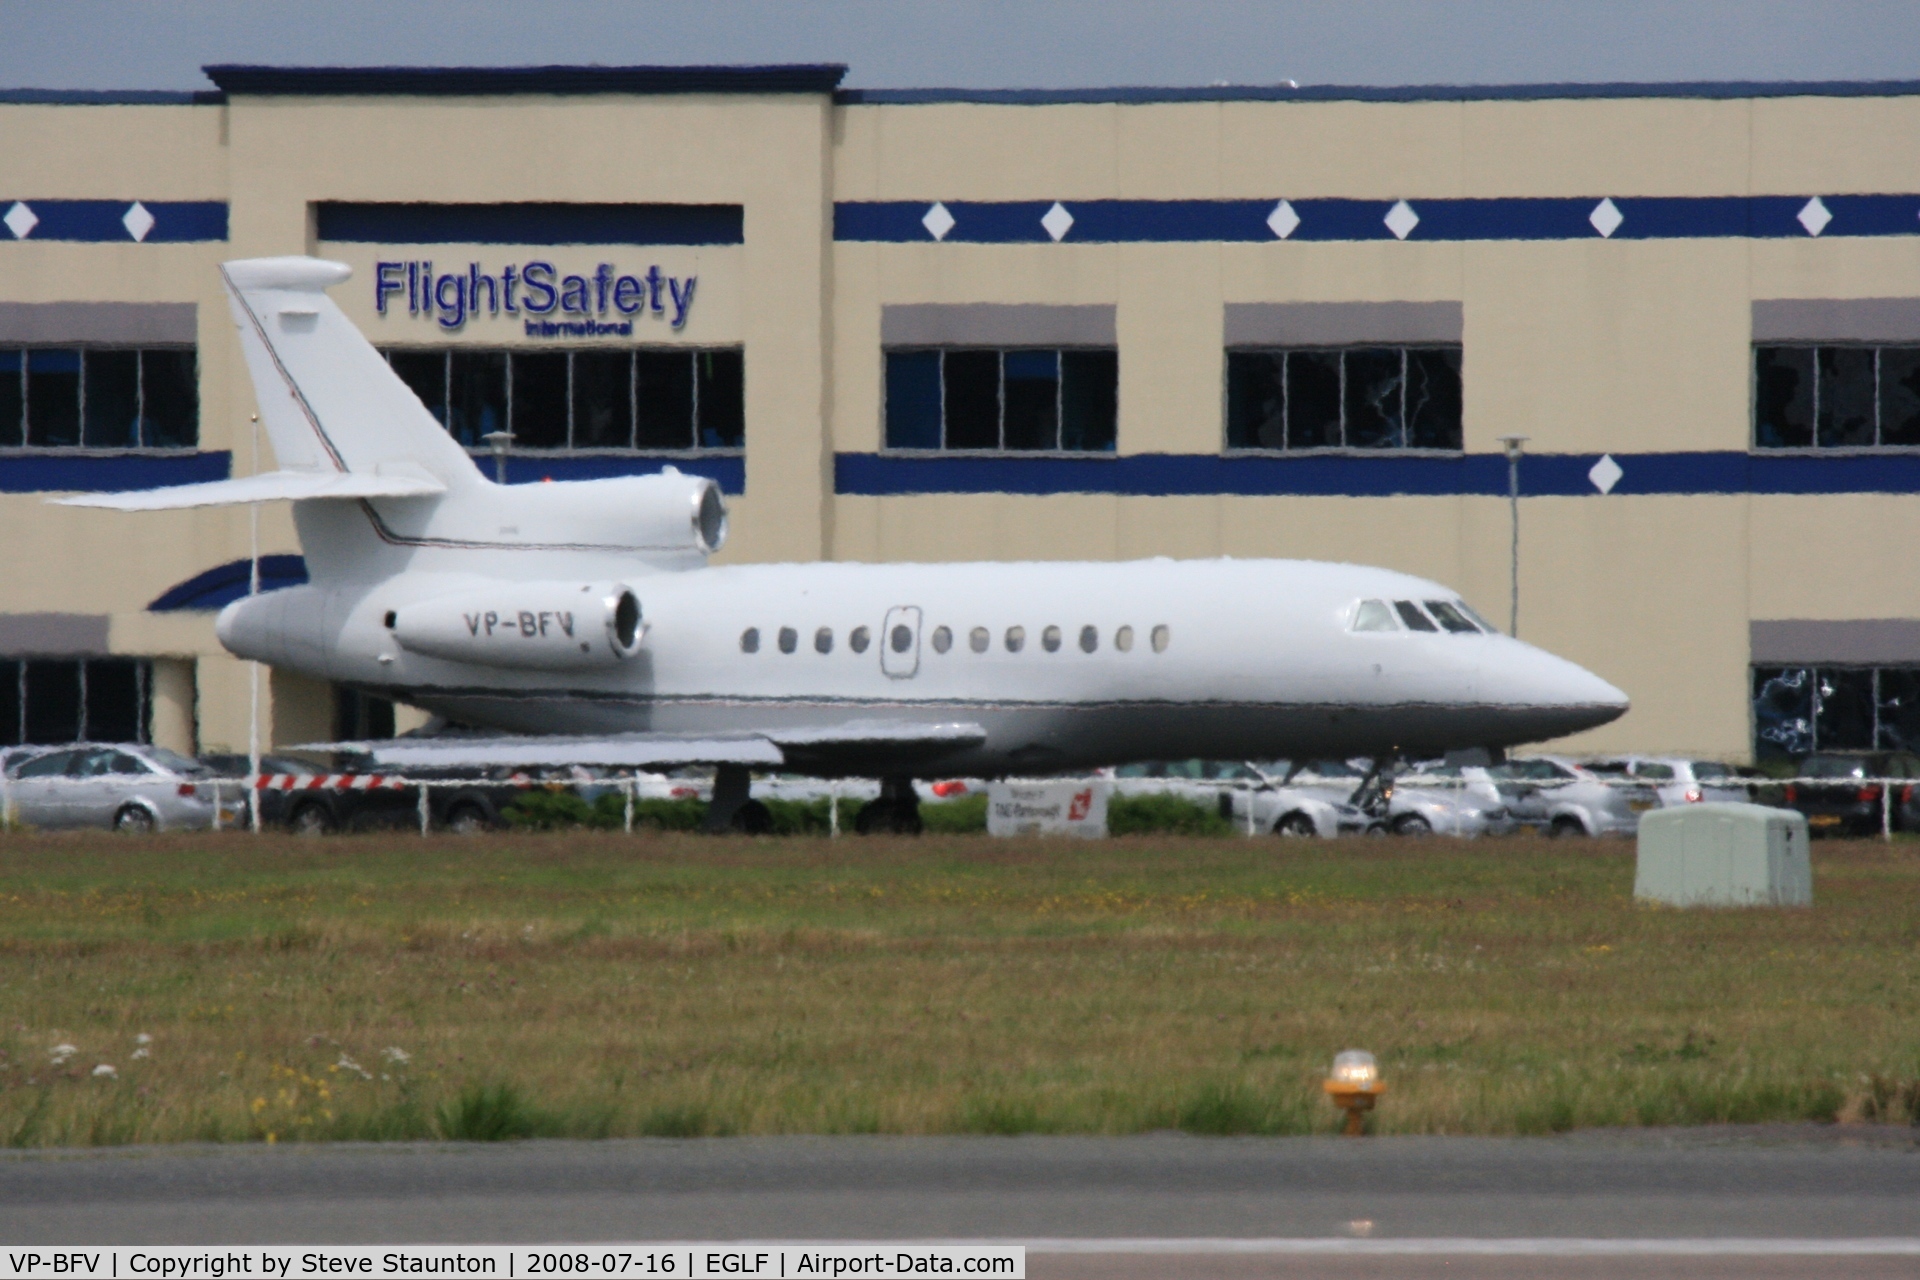 VP-BFV, 2002 Dassault Falcon 900EX C/N 111, Taken at Farnborough Airshow on the Wednesday trade day, 16th July 2009